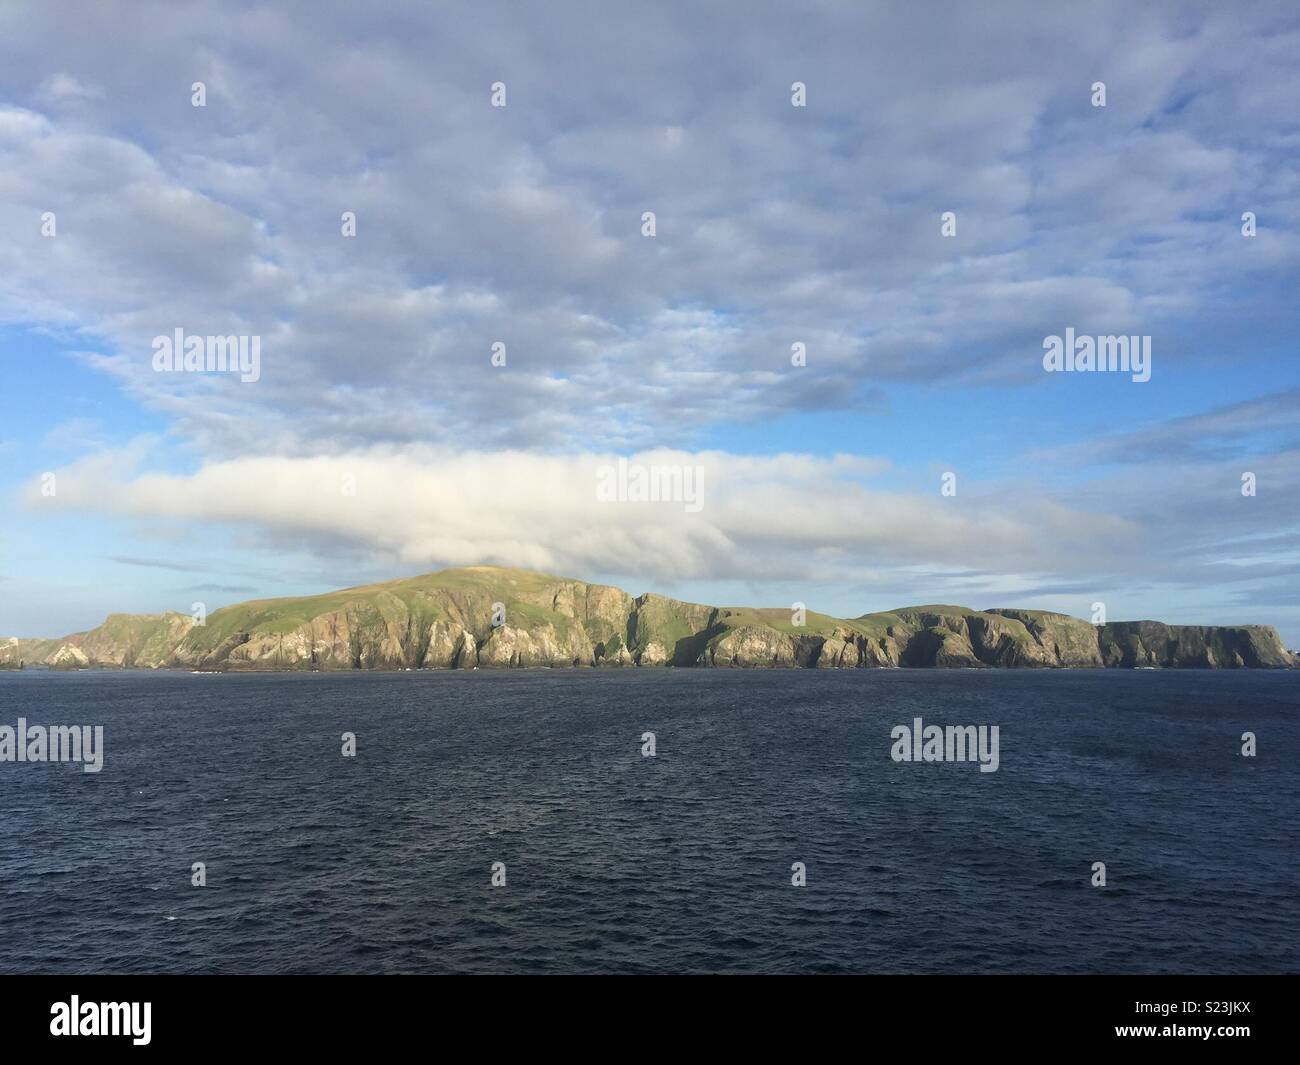 Fair Isle, Scotland, the UK’s most remote inhabited island, seen from the ferry heading from Shetland to Aberdeen. Stock Photo